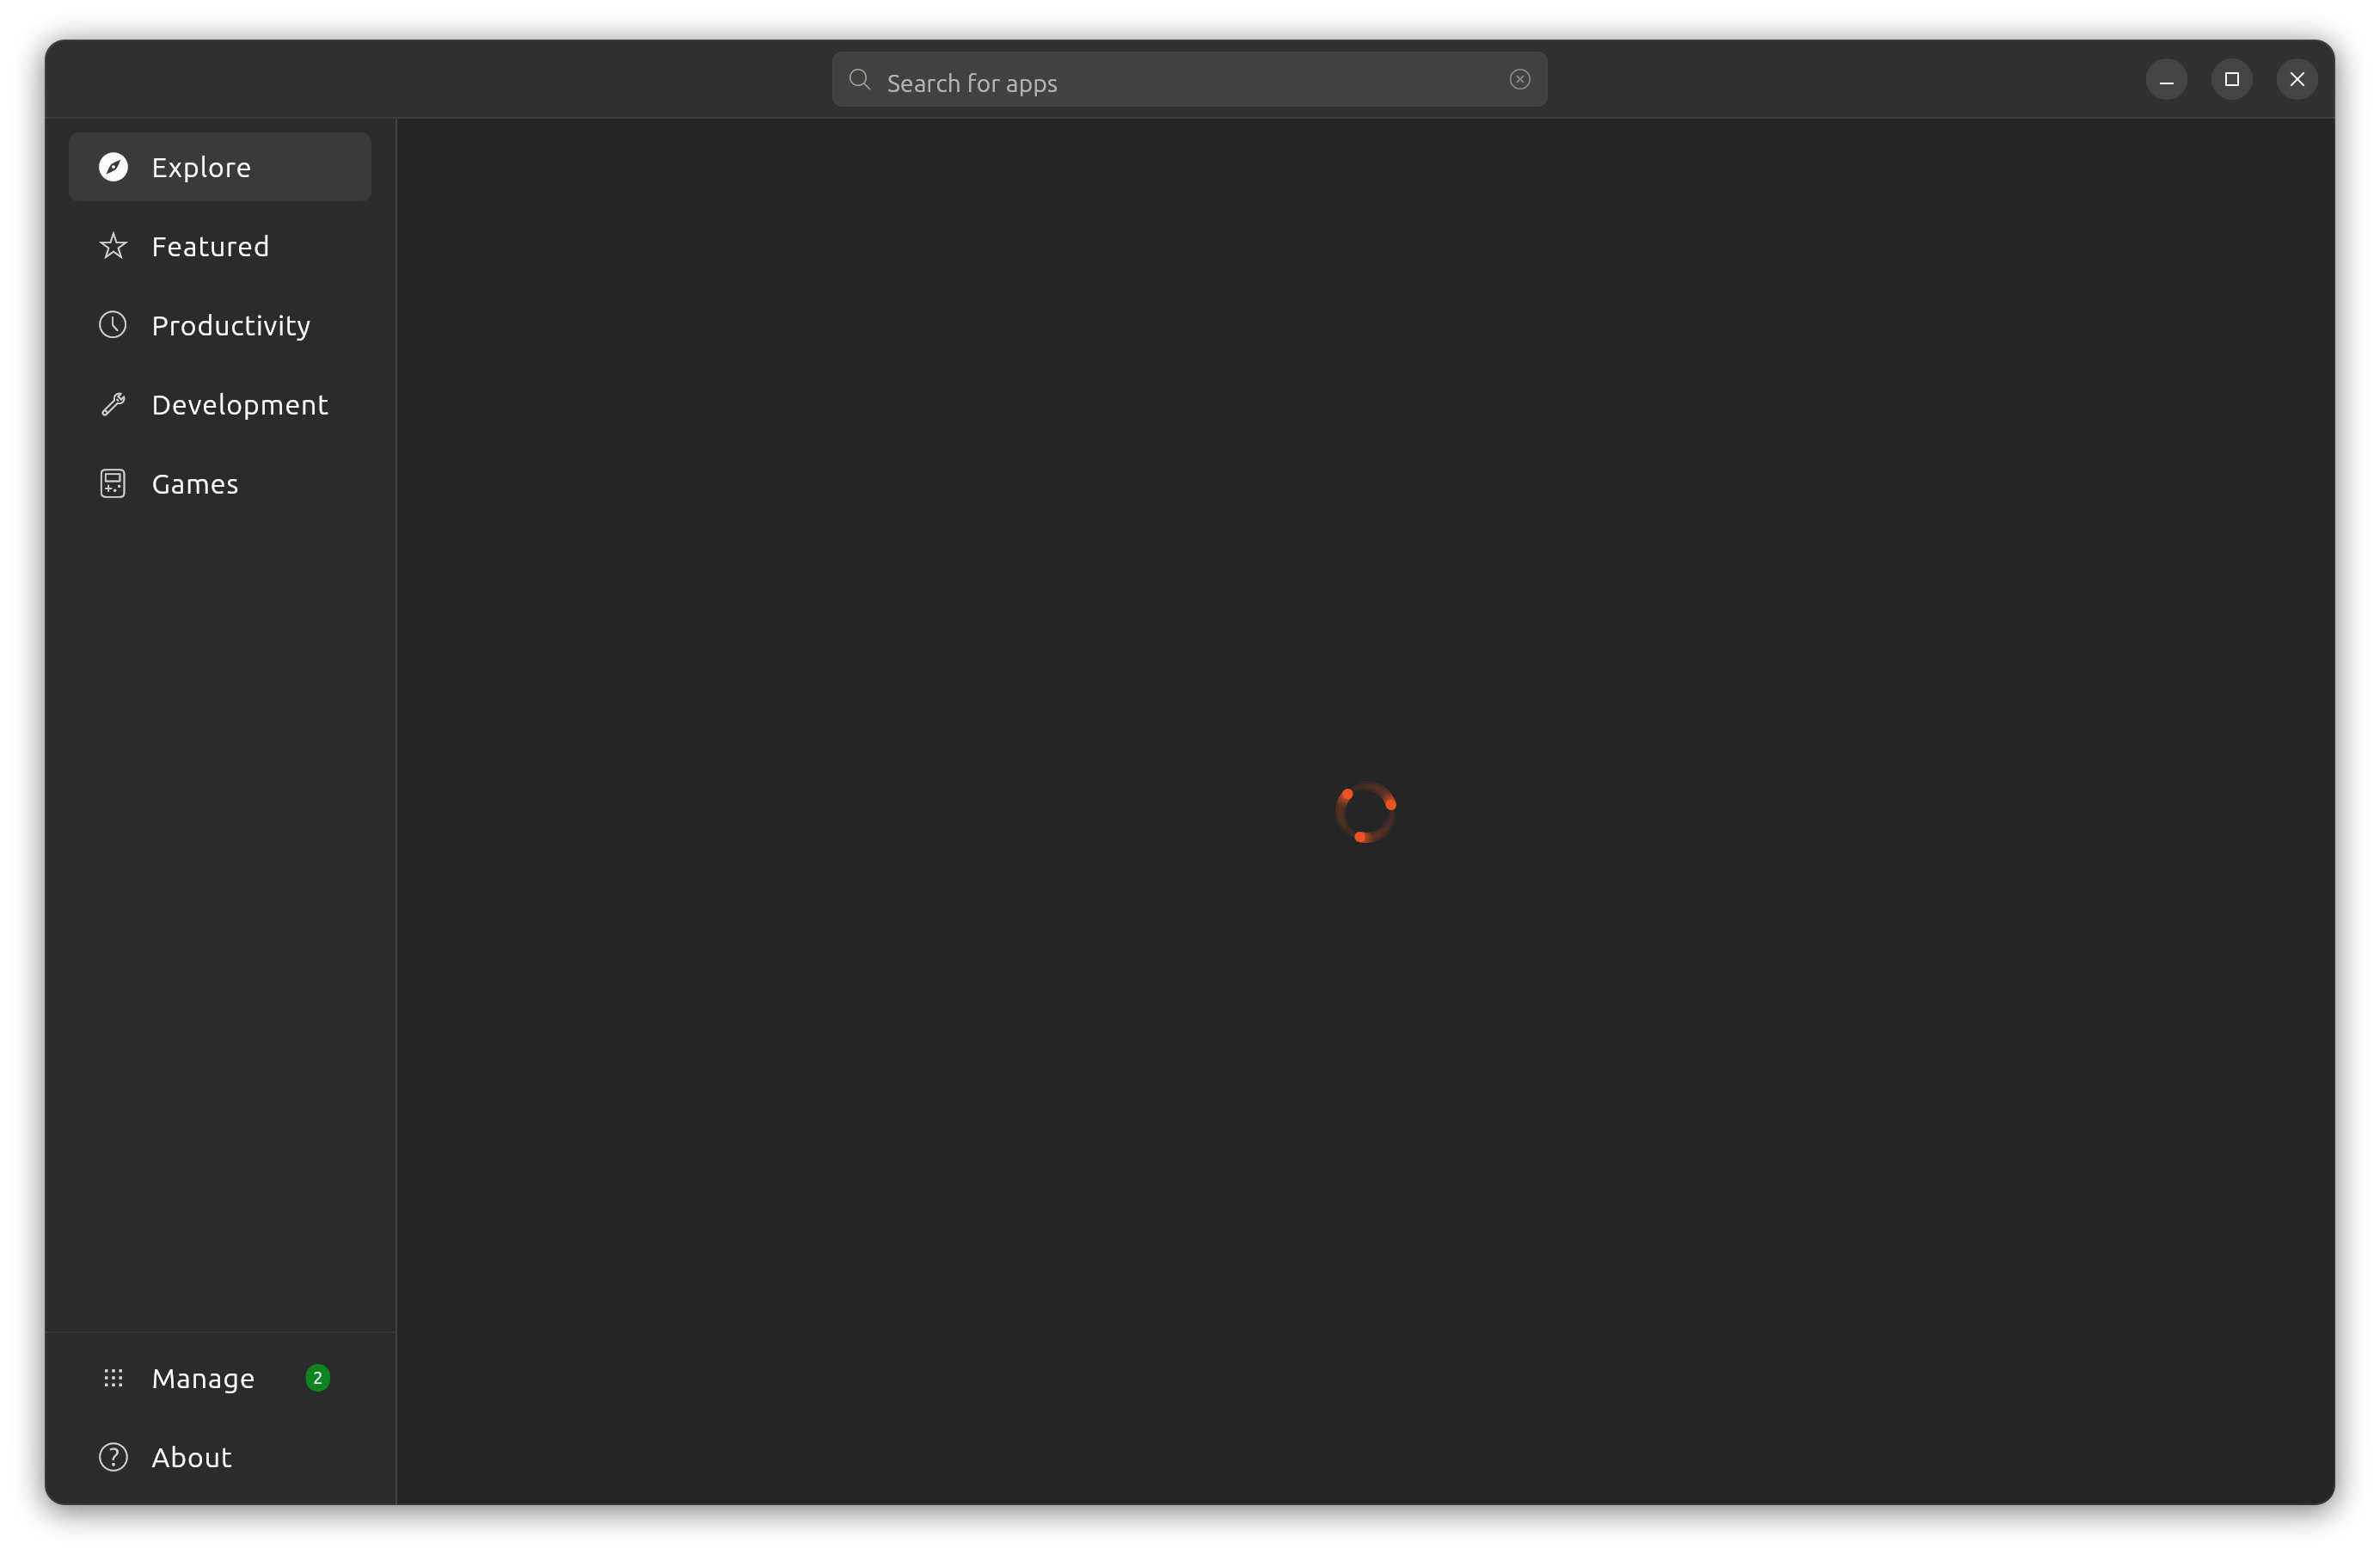 Ubuntu app store keeps on loading without even showing any error message